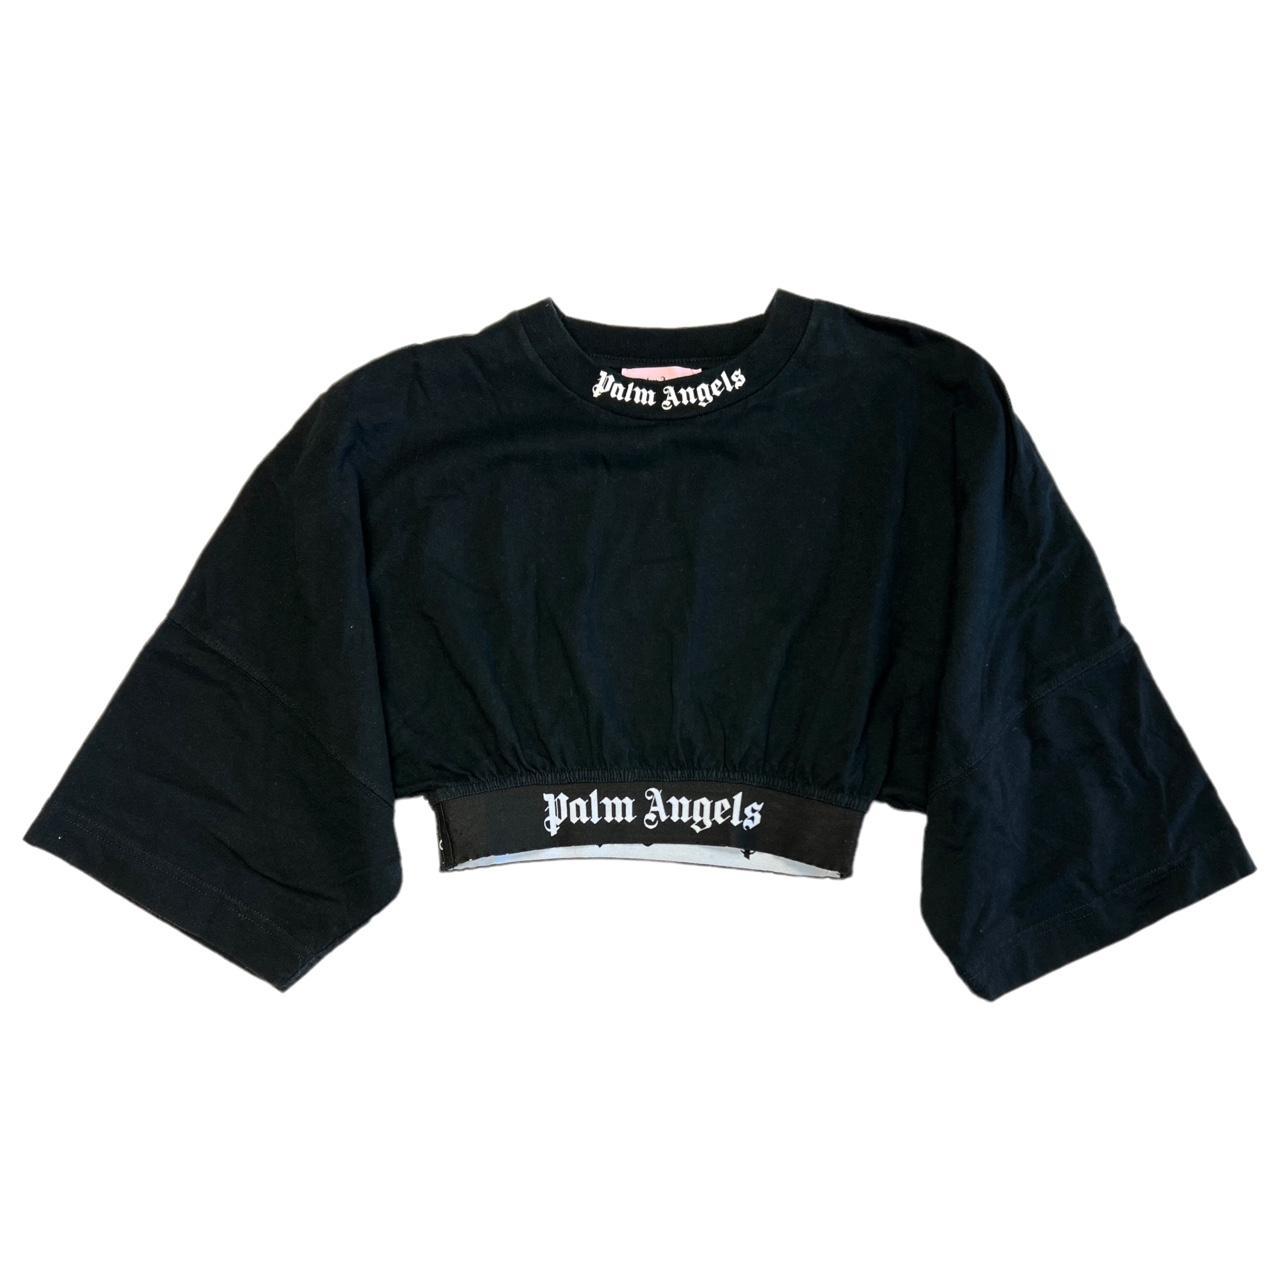 Product Image 1 - Authentic Palm Angels black and